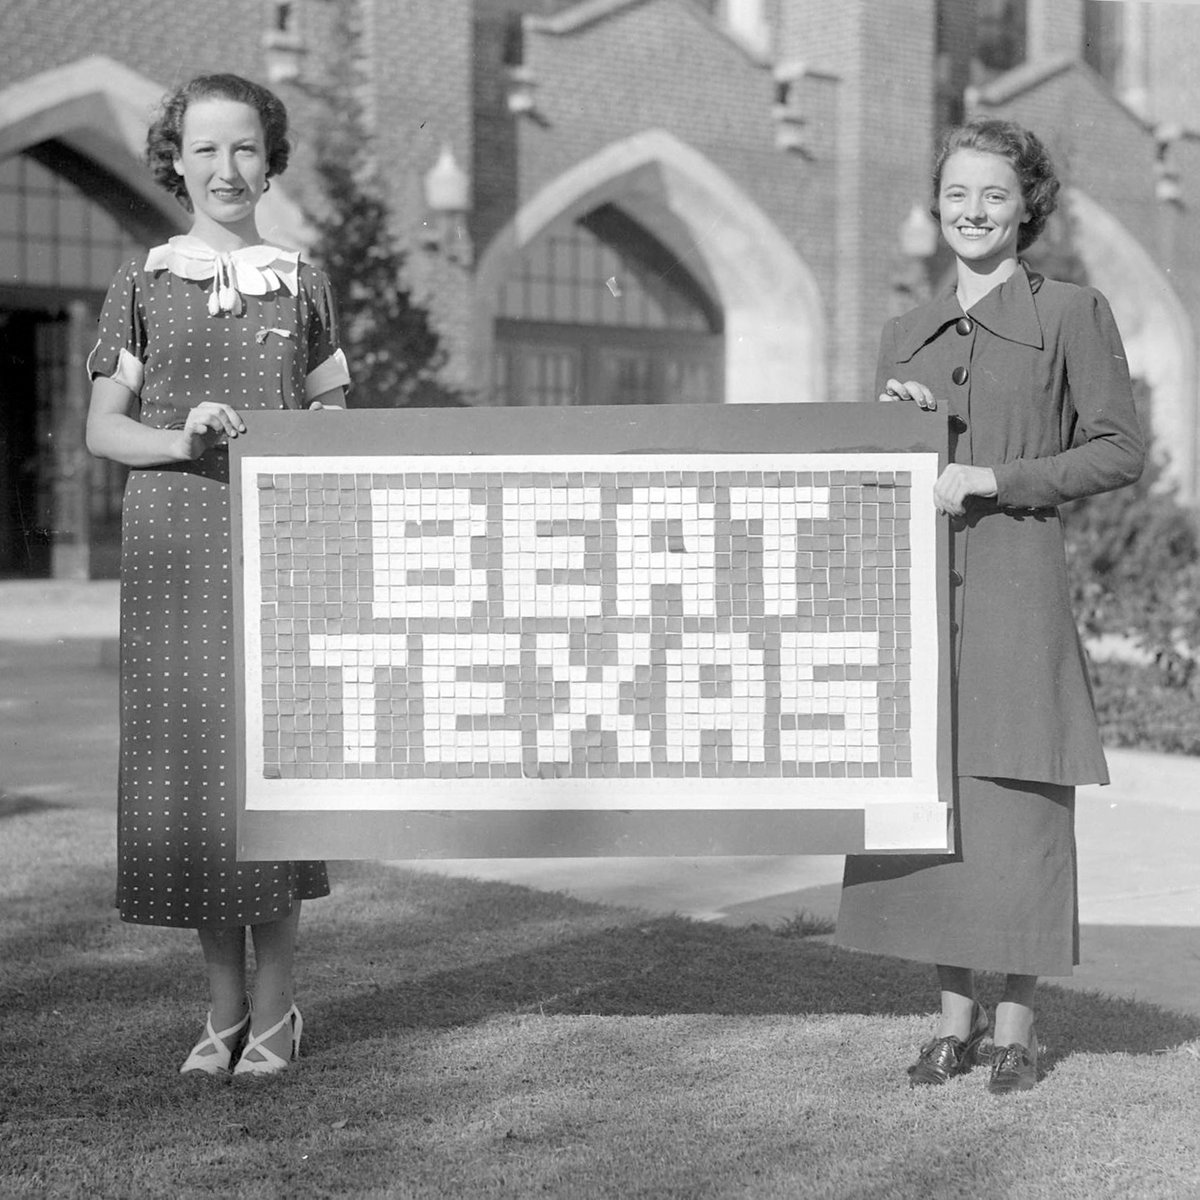 That is all.  

1937 from the Western History Collection’s “Oklahoma vs. Texas” gallery. See more here: legacy-westhist.libraries.ou.edu/locations/docs… 

#ArchivalImages #WesternHistory #BeatTexas #OUSooners #SoonerFootball #UniversityofOklahoma #AcademicLibrary